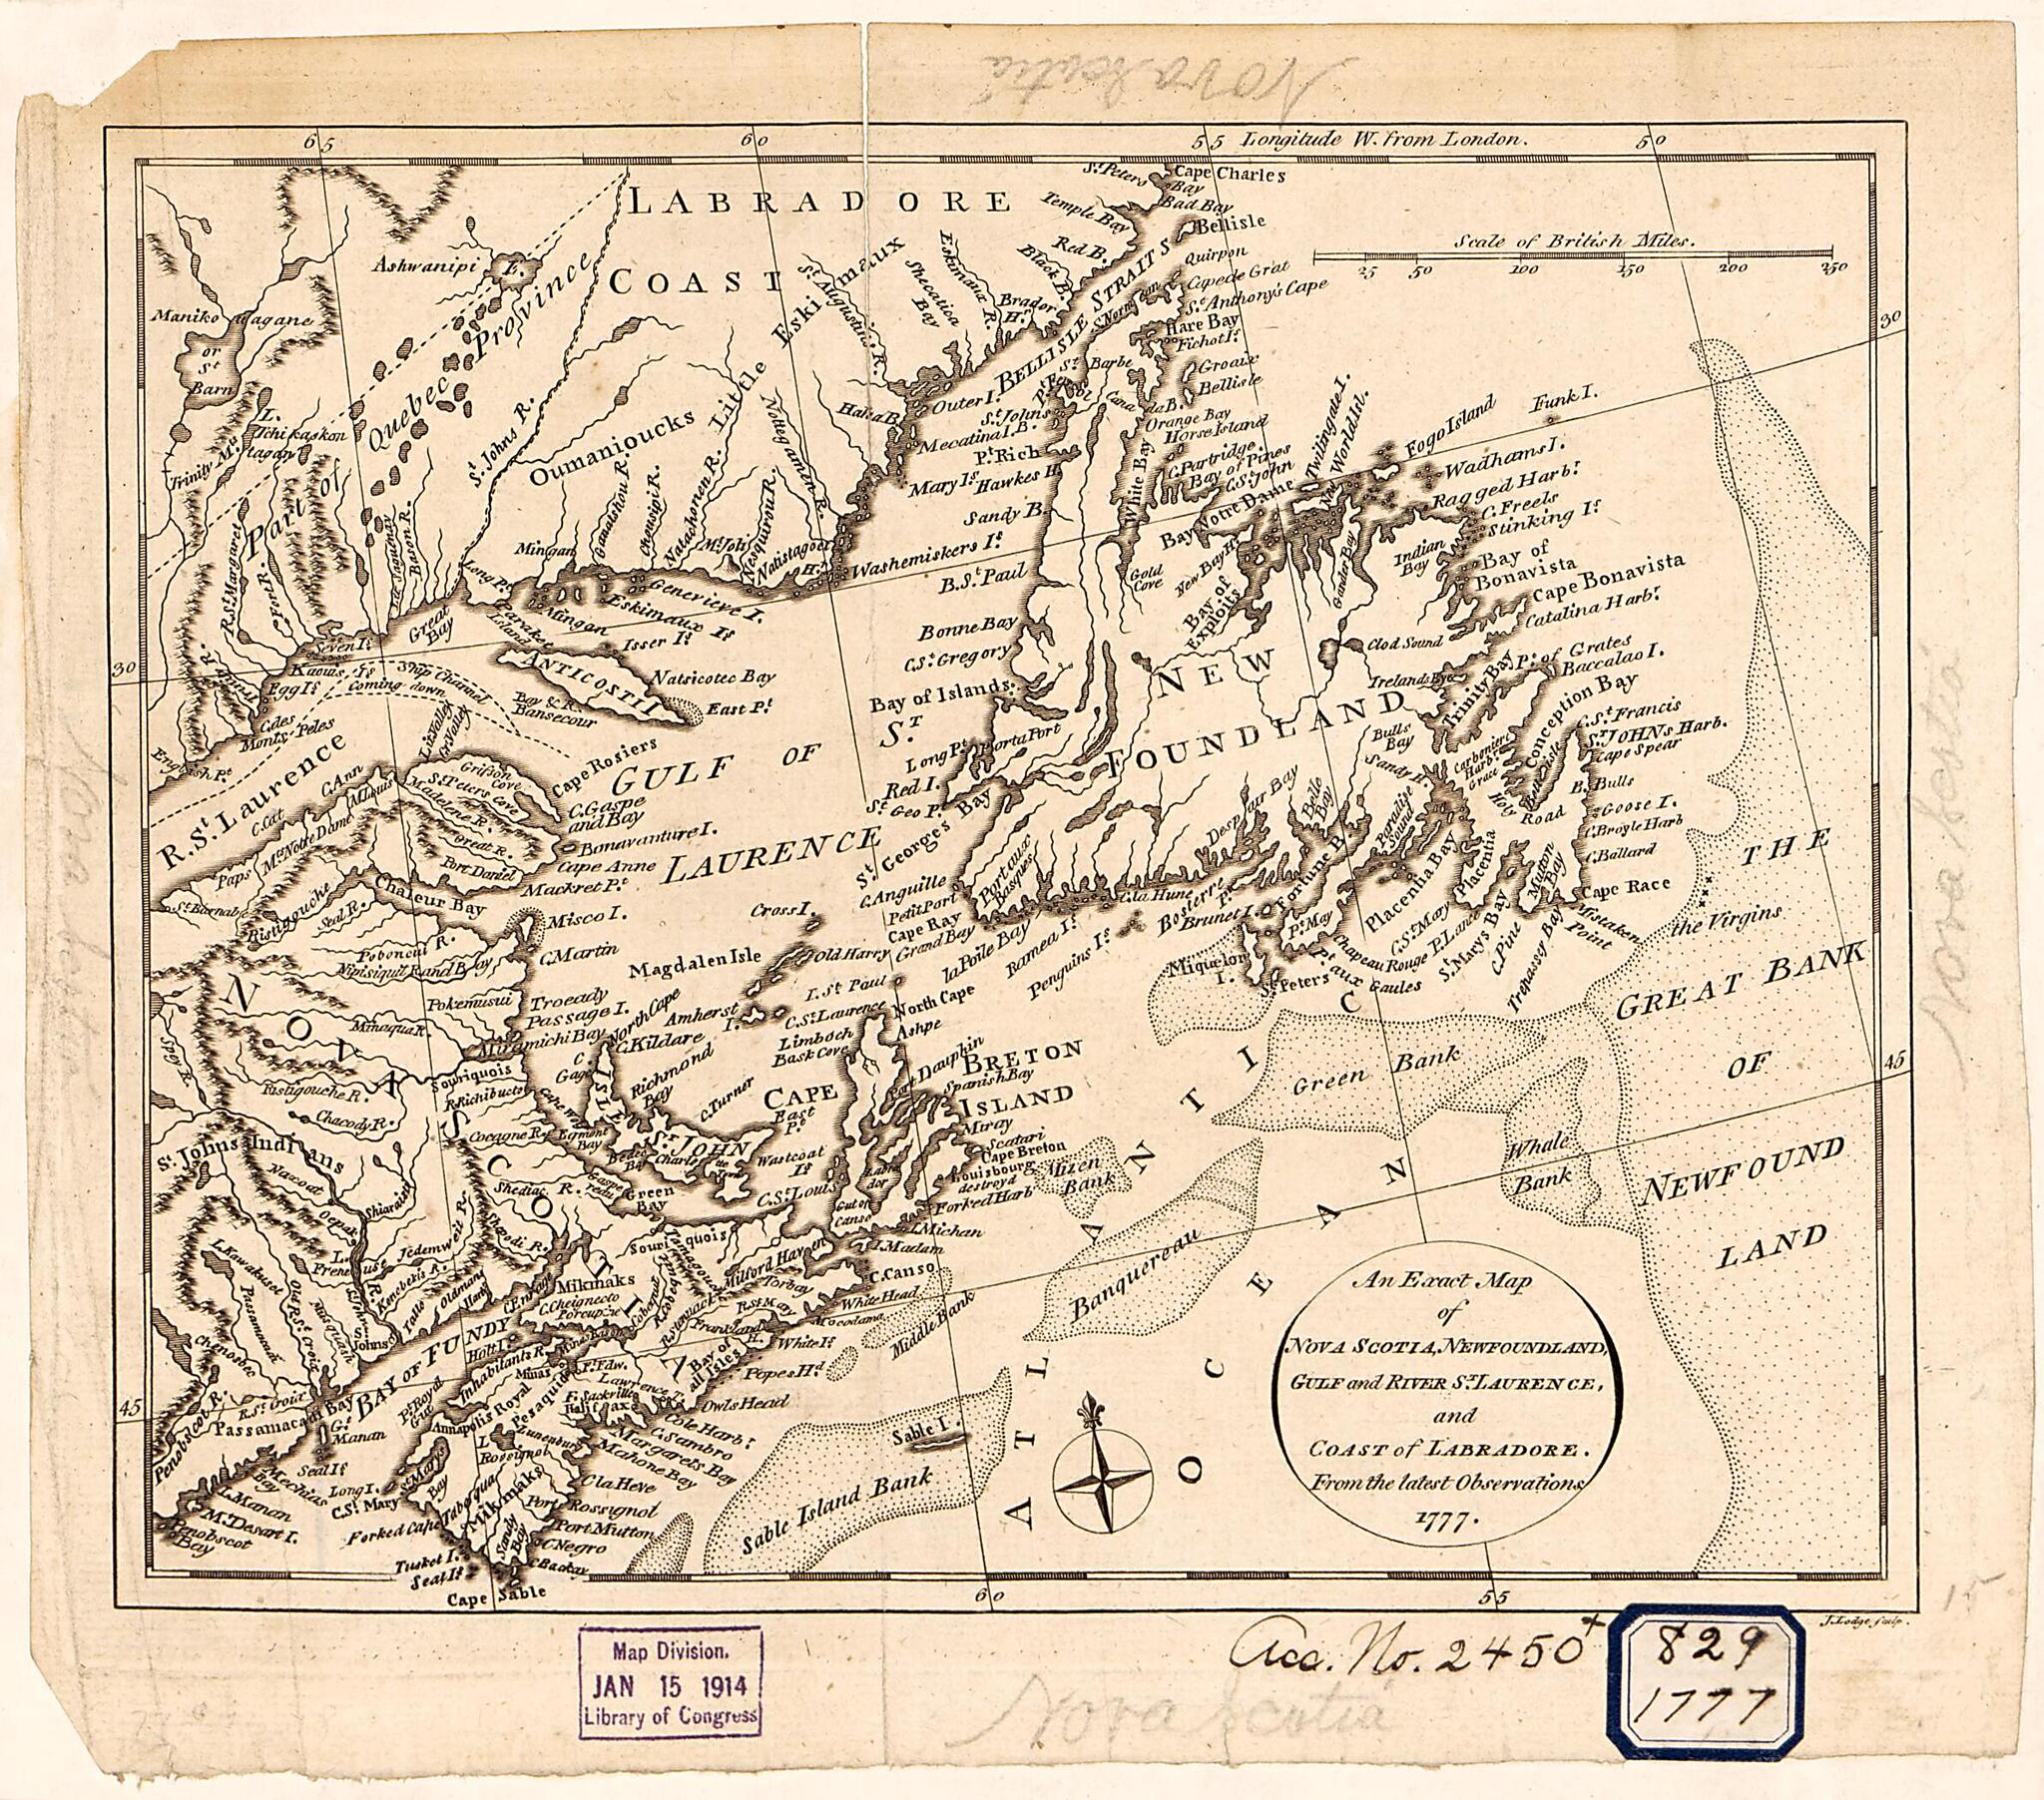 This old map of An Exact Map of Nova Scotia, Newfoundland, Gulf and River St. Laurence, and Coast of Labradore : from the Latest Observations from 1777 was created by John Lodge in 1777